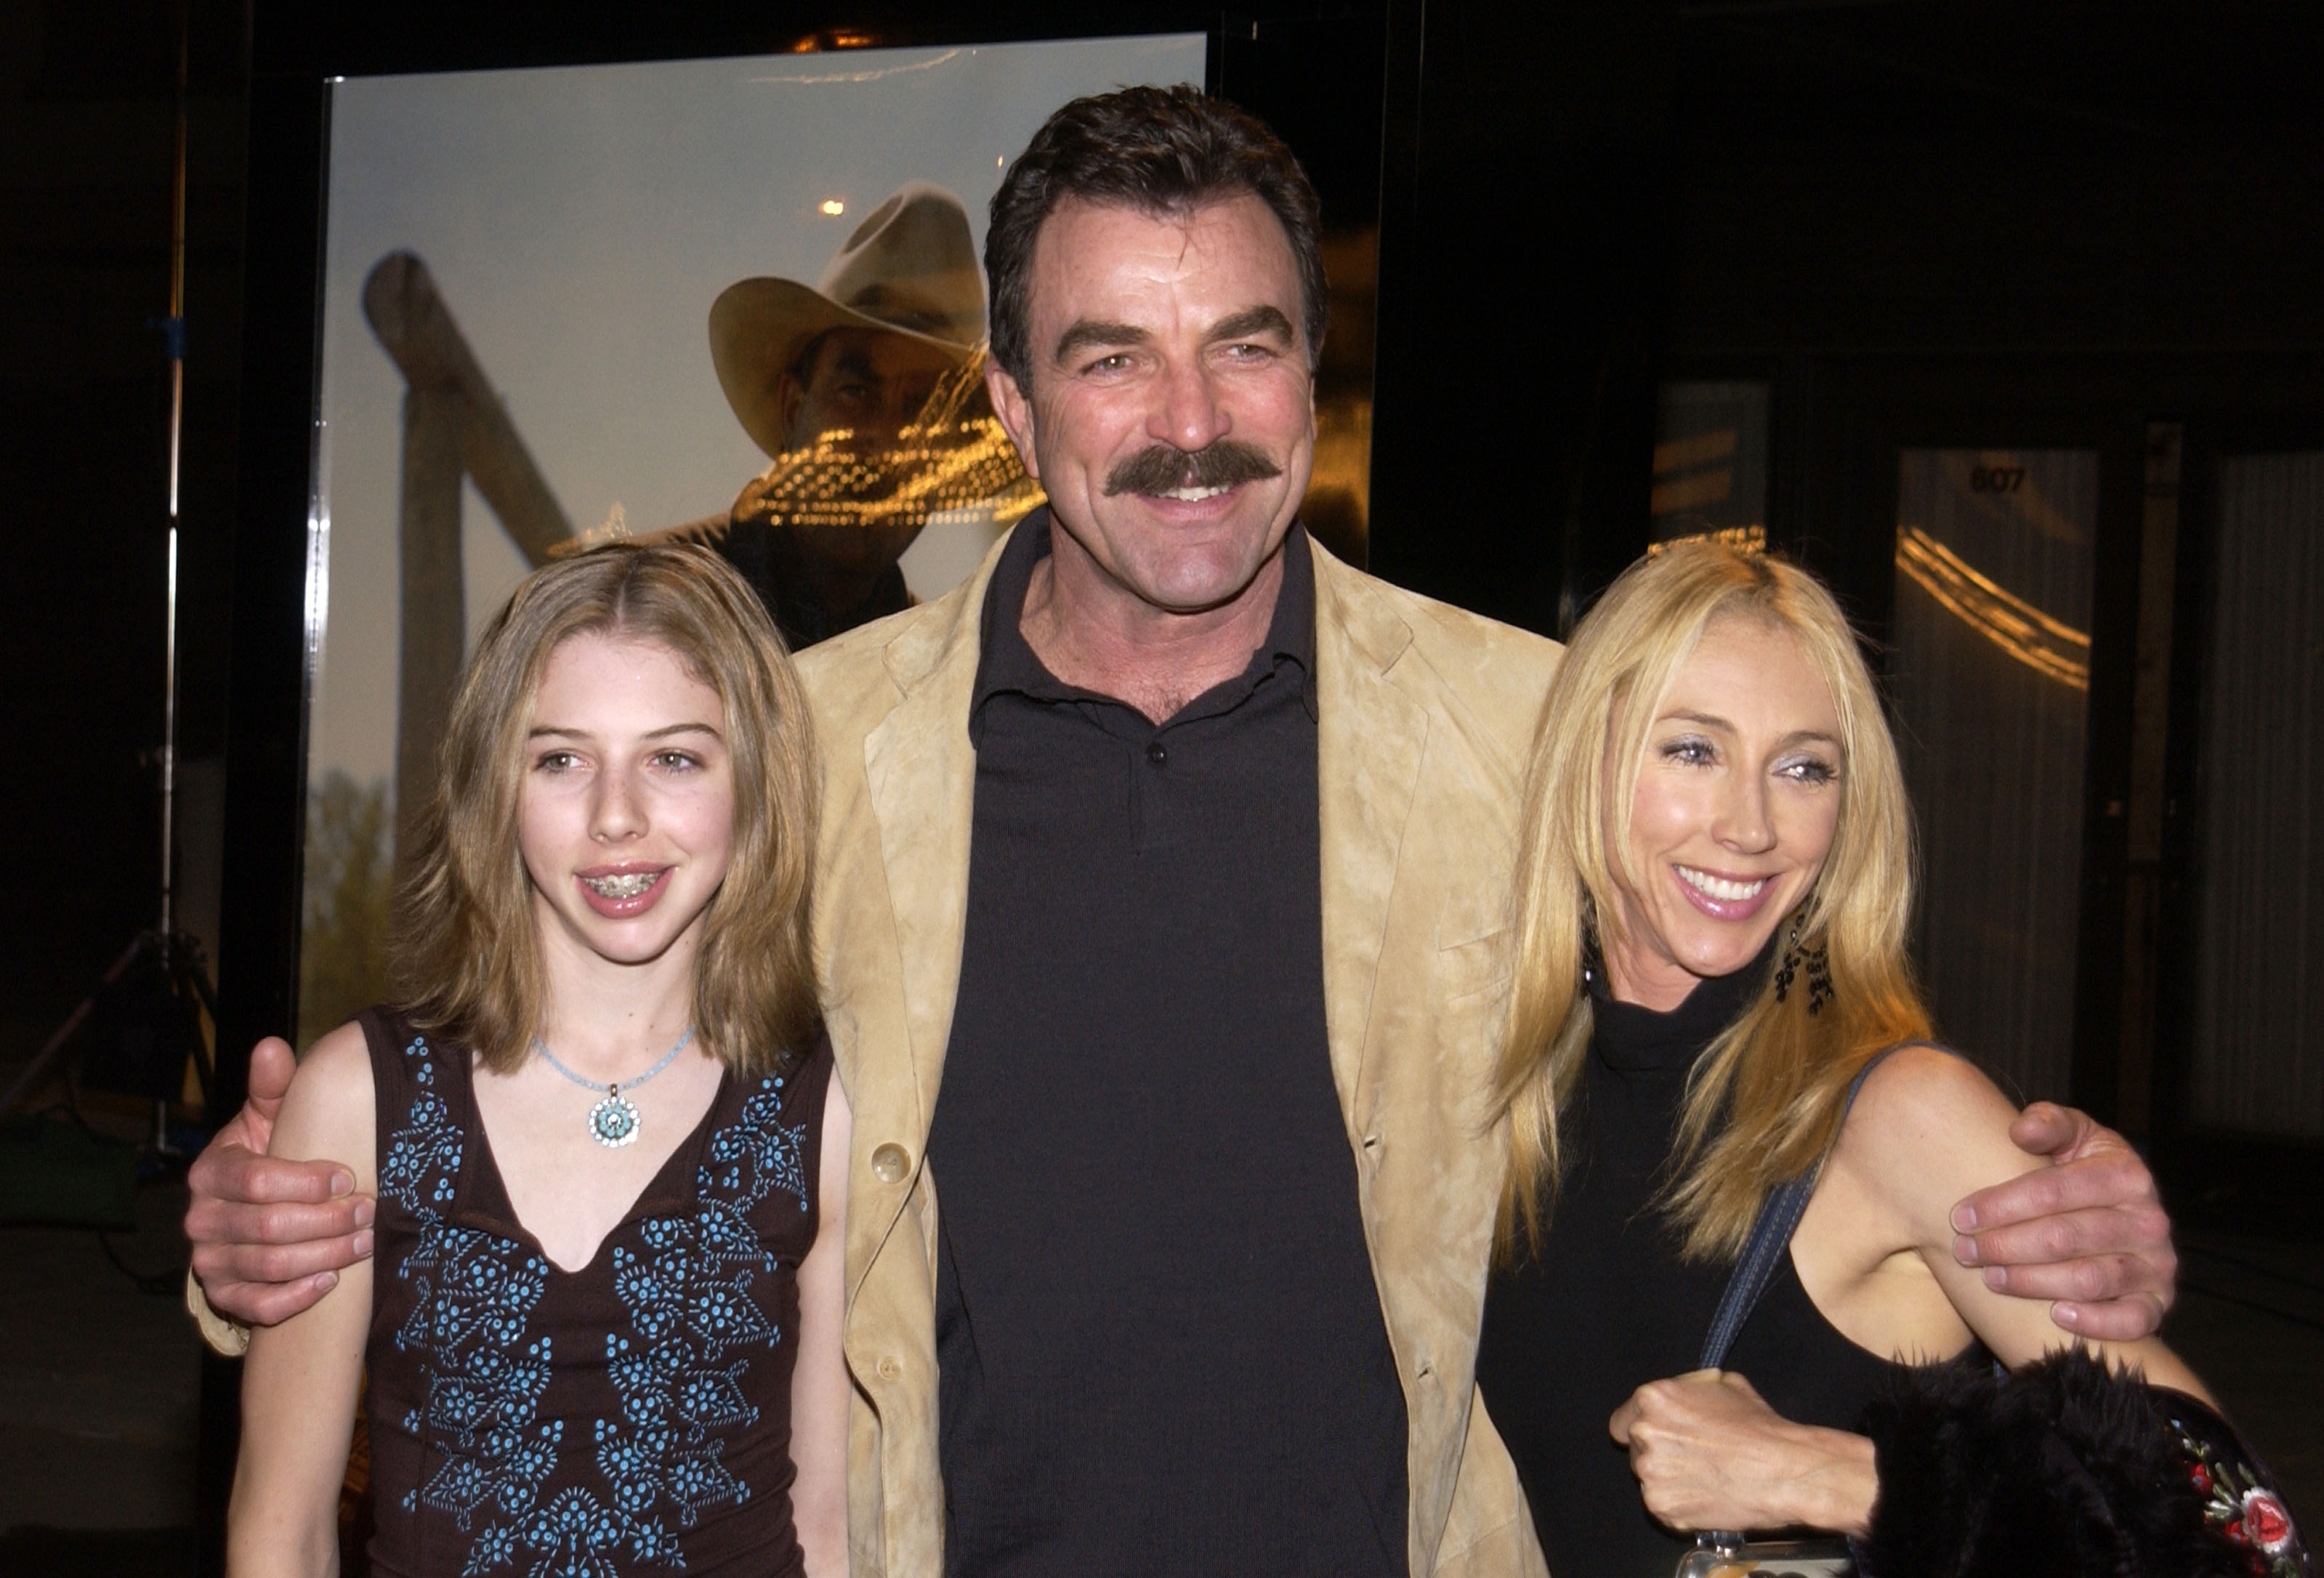 Tom Selleck, Jillie Mack, and Hannah at TNT's "Monte Walsh" premiere in Los Angeles on January 8, 2003 | Source: Getty Images